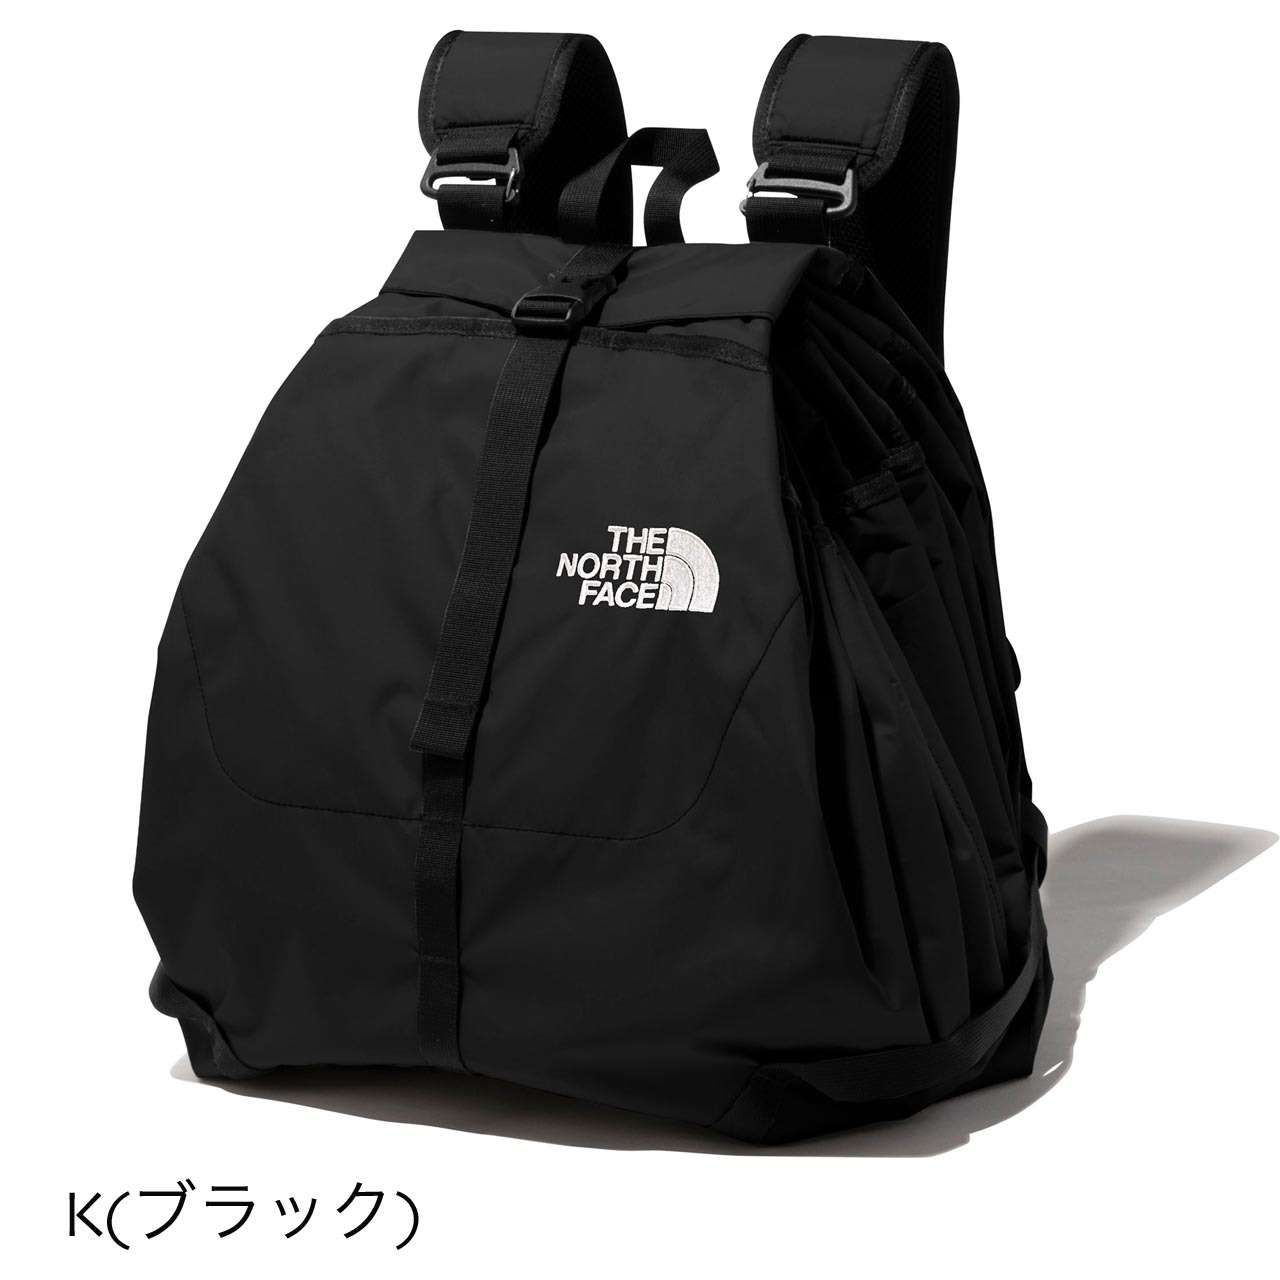 THE NORTH FACE [ザ・ノース・フェイス] Escape Pack [NM82230]_f0051306_08001418.jpg